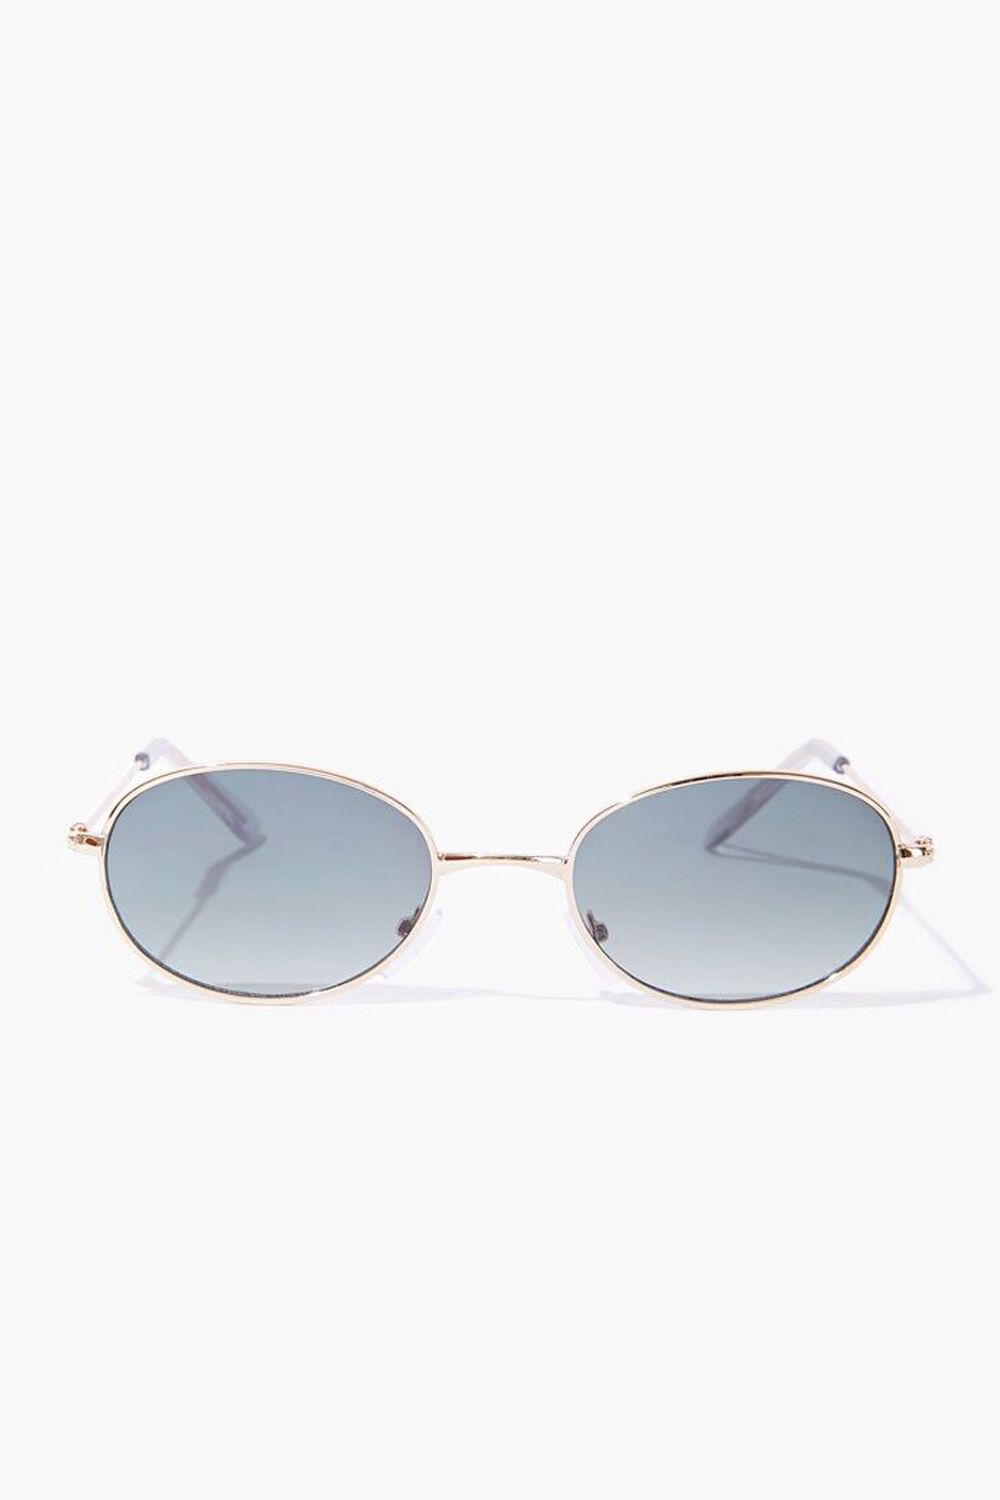 GOLD/OLIVE Oval Tinted Sunglasses, image 1